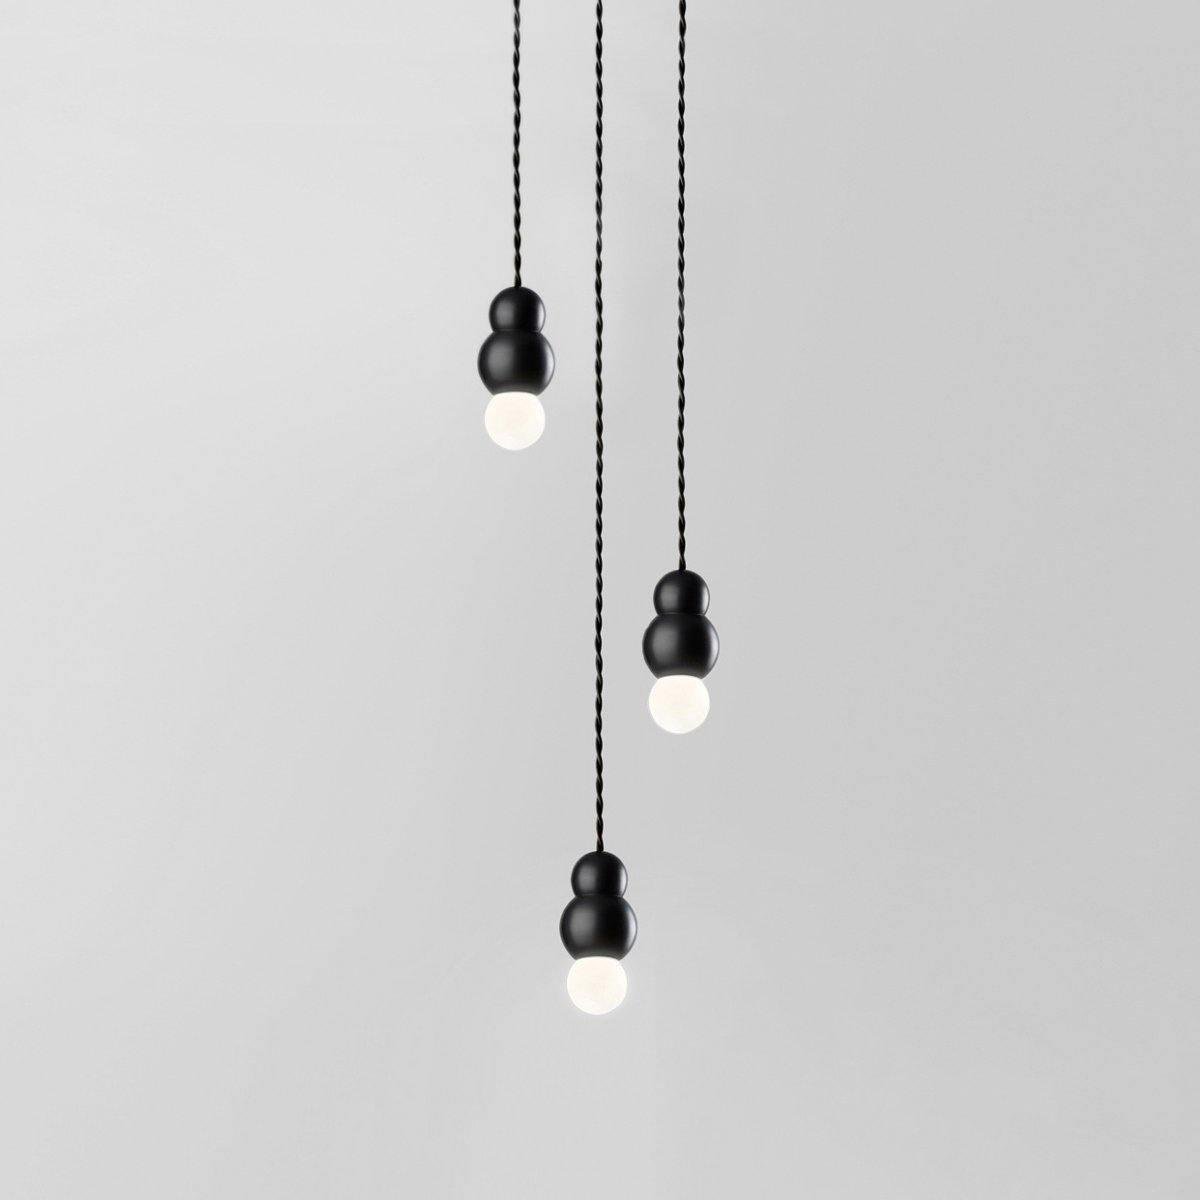 Flex Black Ball Pendant Light Series with 3 Heads, measuring 3.14" in diameter (8cm) and 5.03" in height (12.8cm).